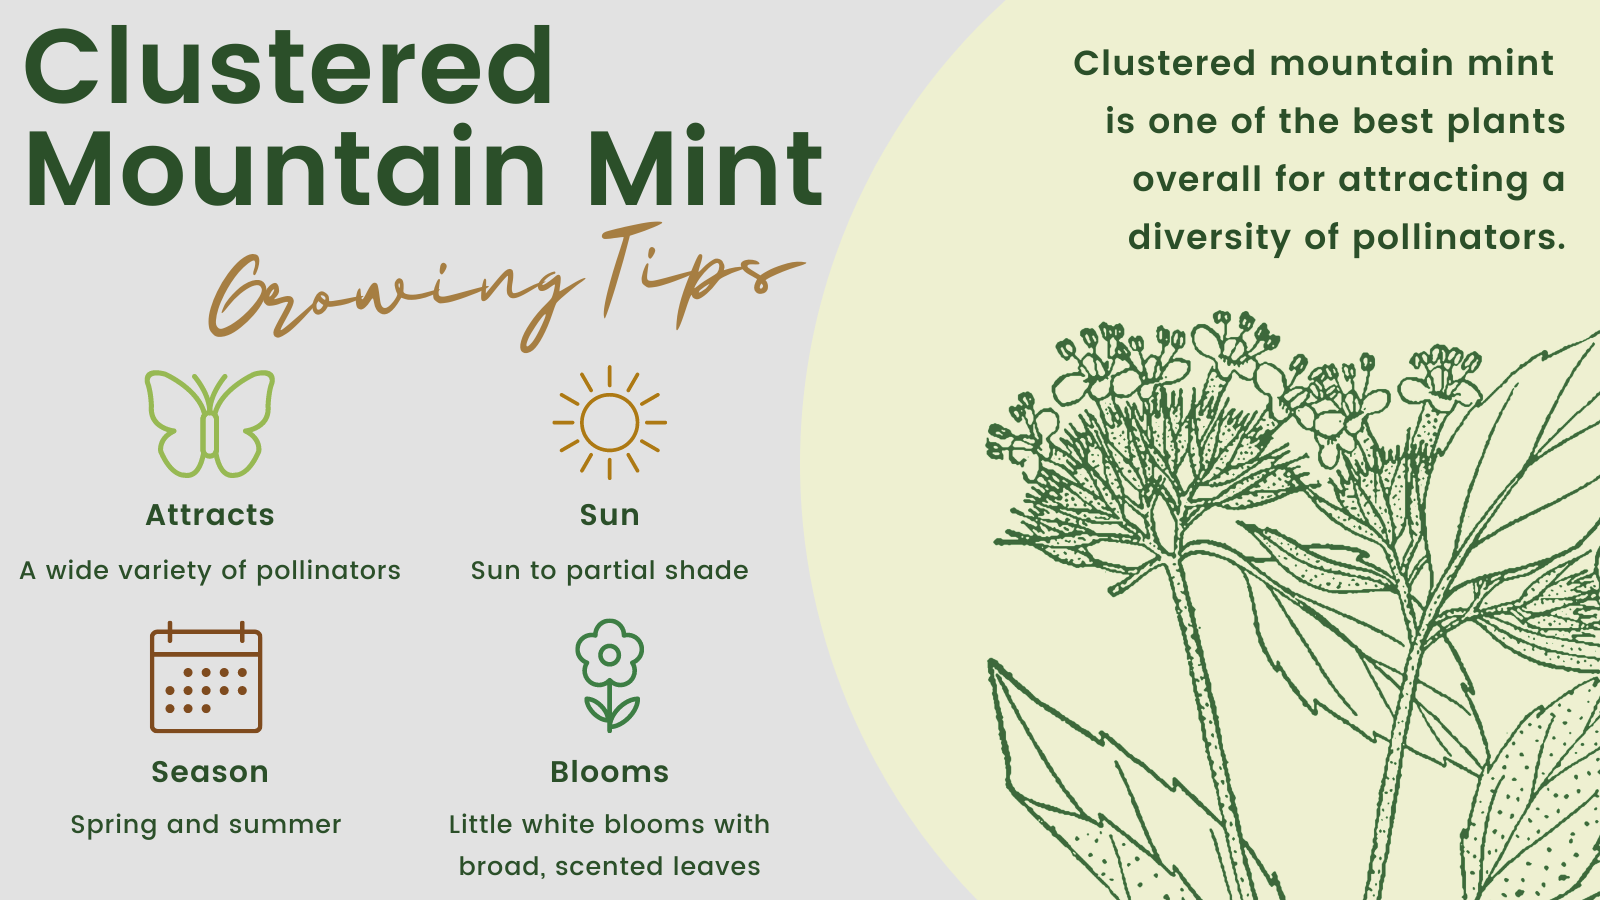 Clustered Mountain Mint Growing Tips: Clustered mountain mint is one of the best plants overall for attracting a diversity of pollinators. Attracts: A wide variety of pollinators. Sun: Sun to partial shade. Season: Spring and summer. Blooms: Little white blooms with broad, scented leaves.